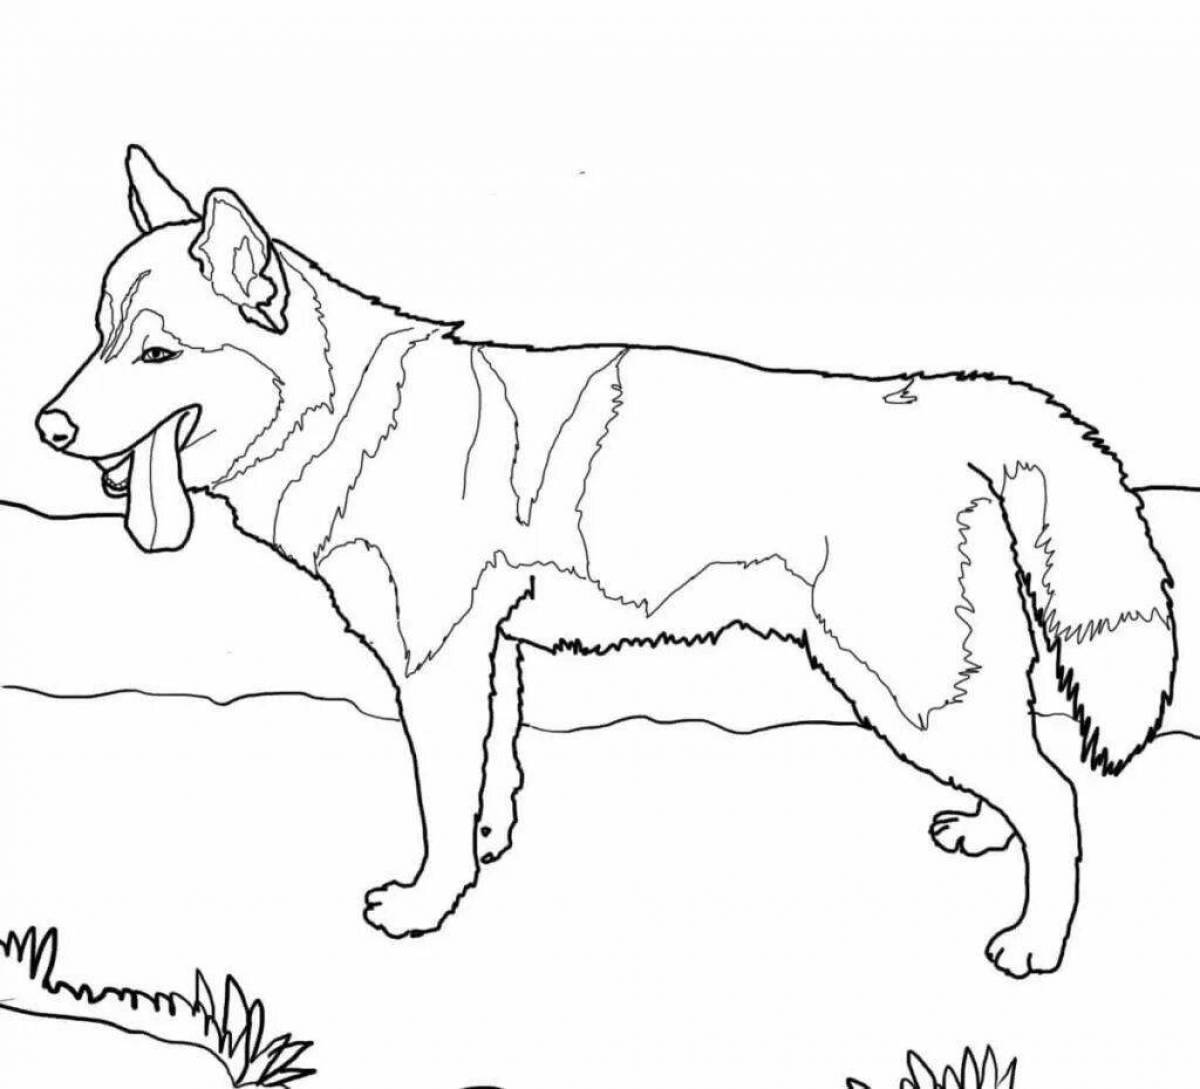 Adorable chink coloring page